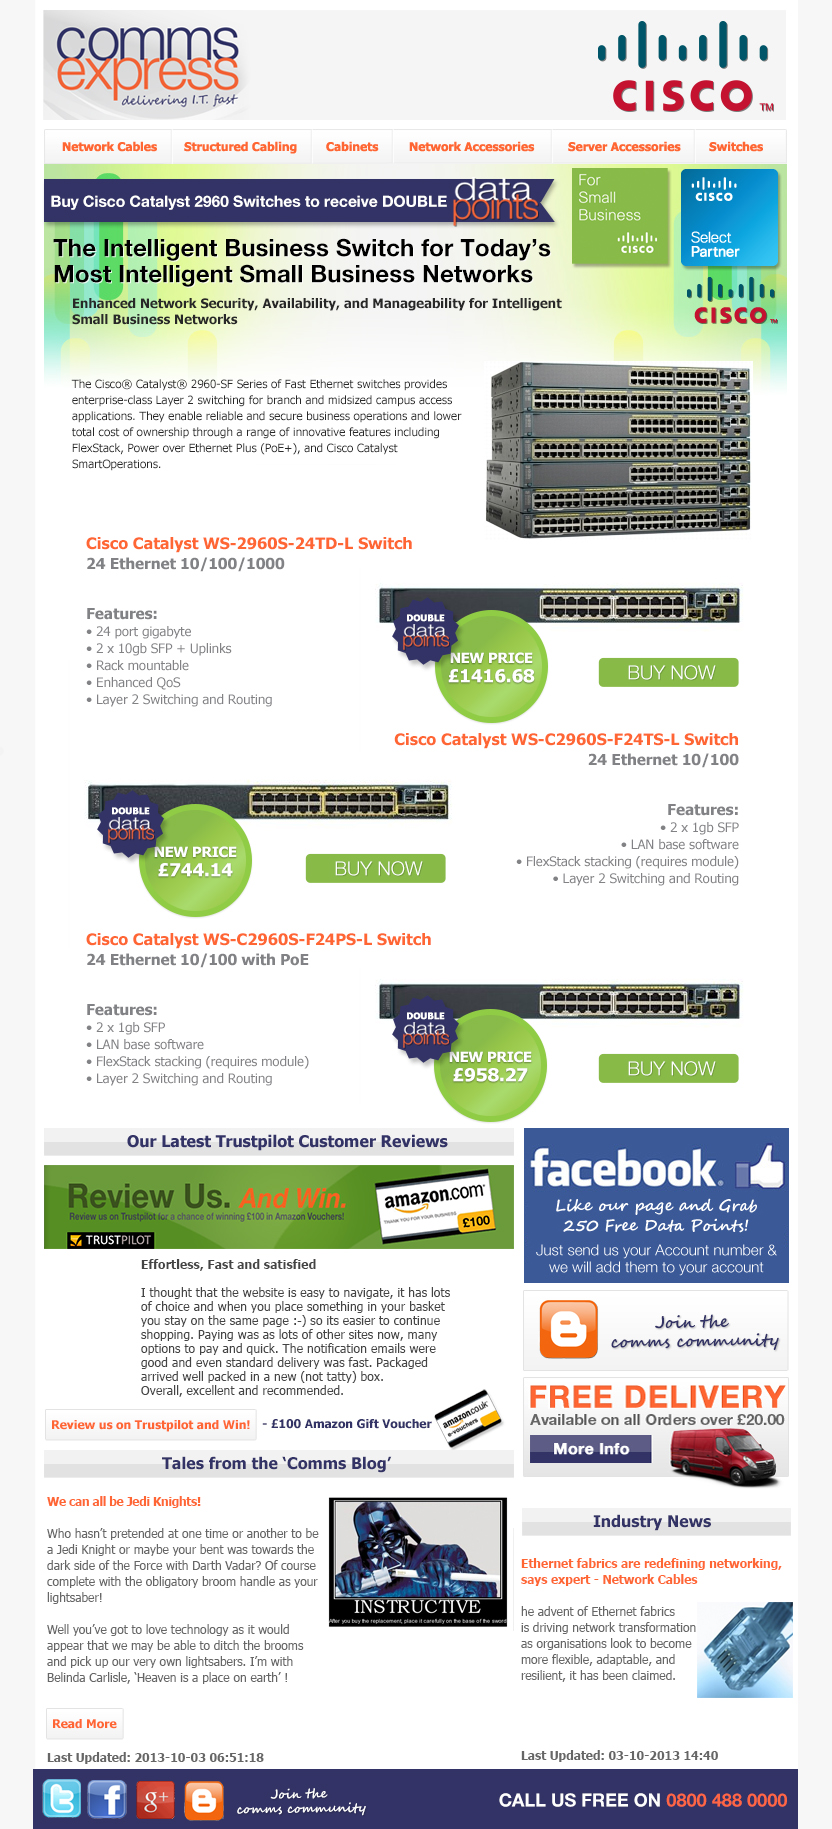 Great Prices and Double Data Points on Cisco 2960 Catal